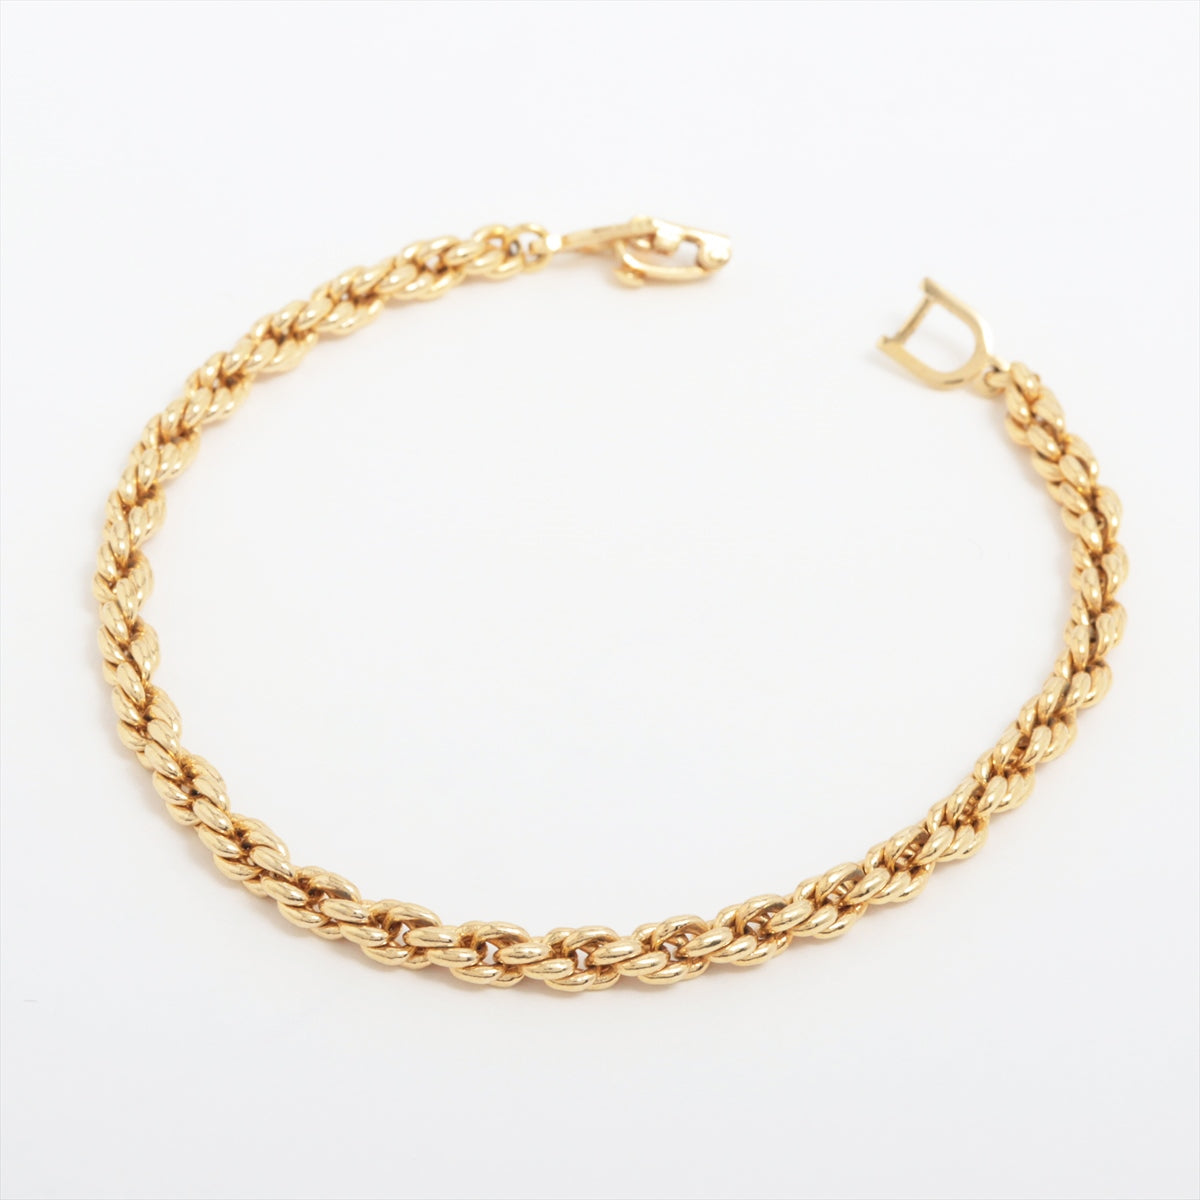 DIOR Bracelet GP Gold Rubbing scratches Losing luster